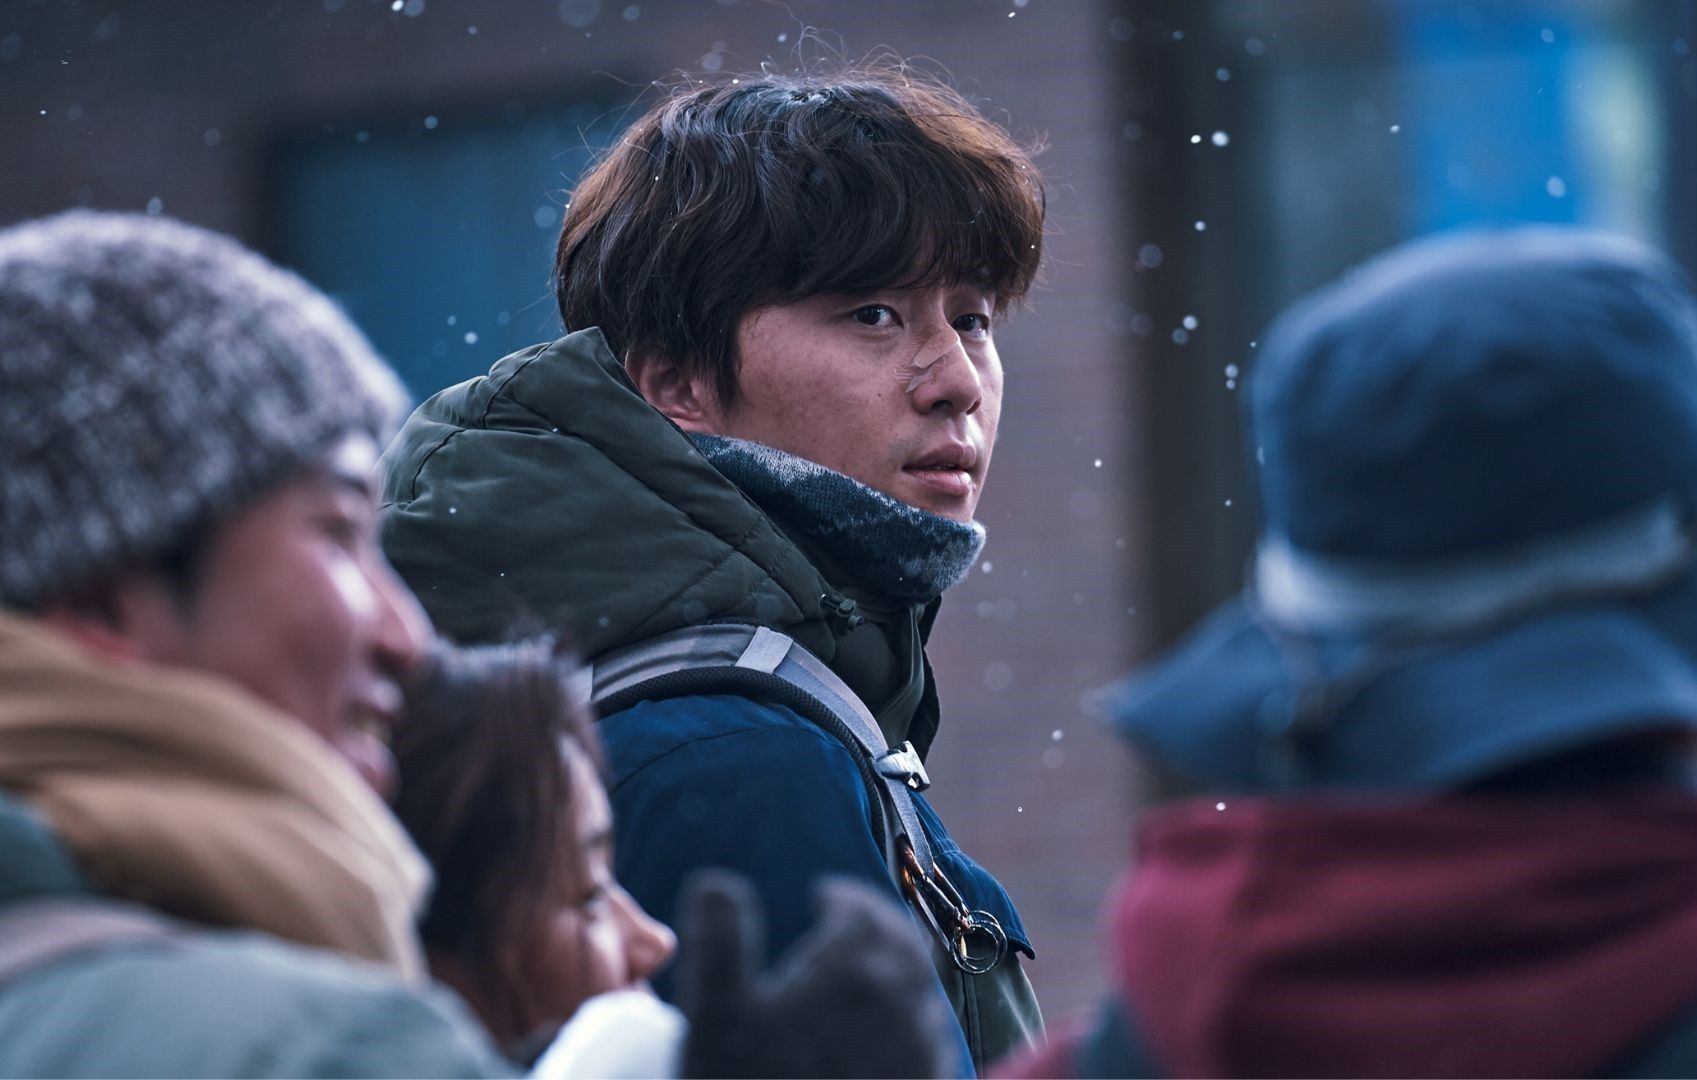 Korea's Oscars entry 'Concrete Utopia' with Park Seo Joon now available for streaming